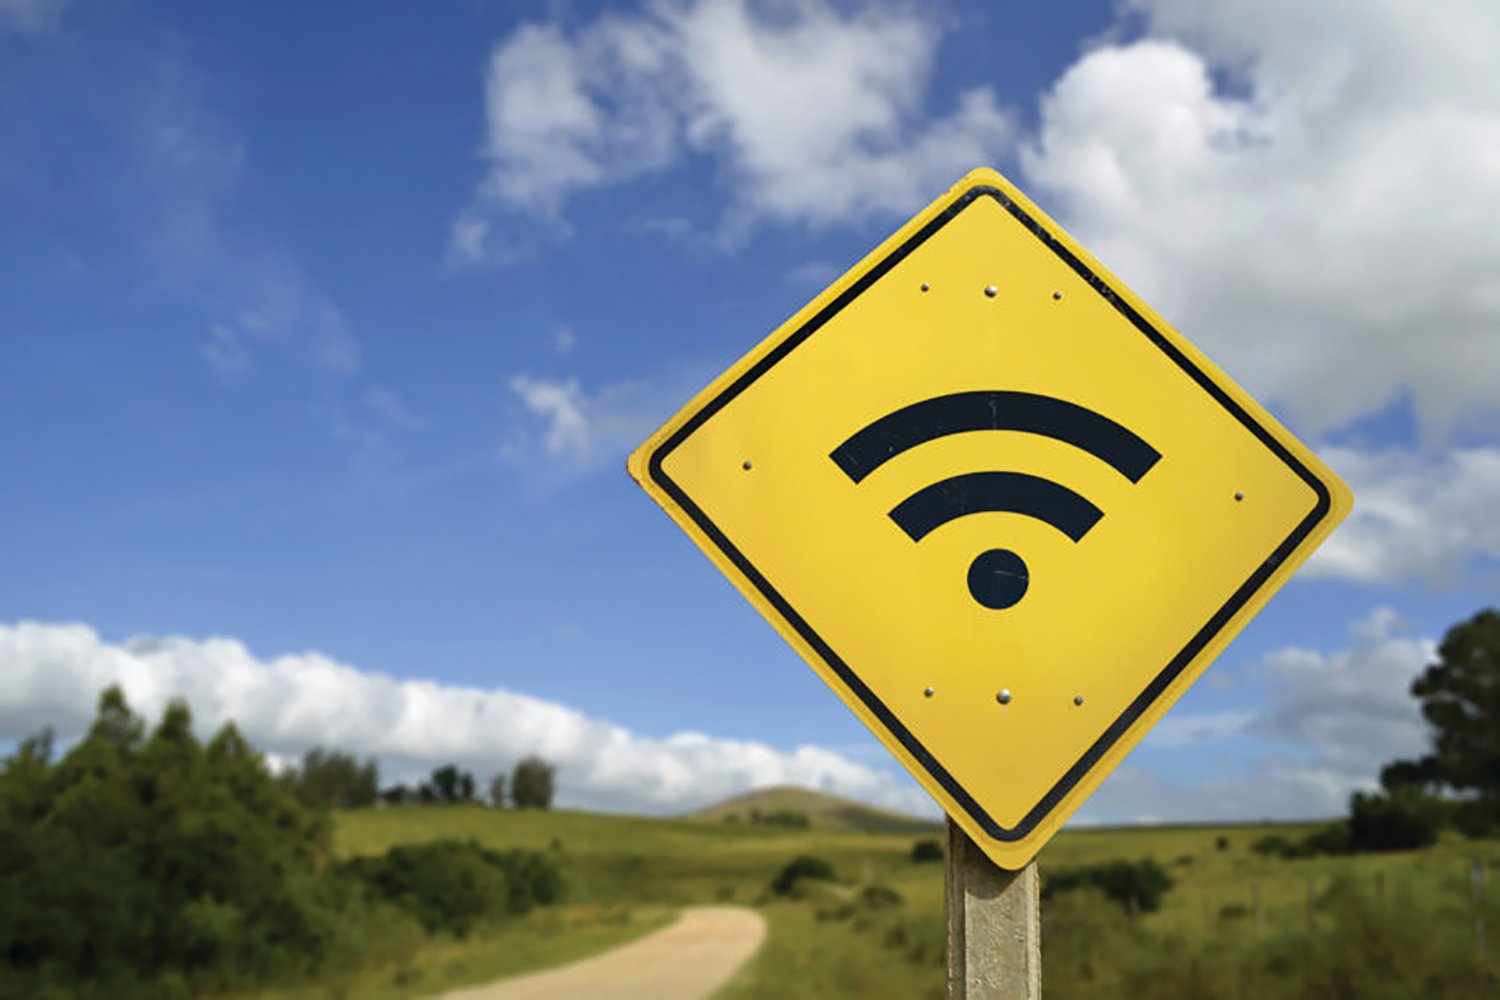 Internet access in remote zone, power of technology concept. Road sign with wifi signal icon on rural environment, includes copy space.